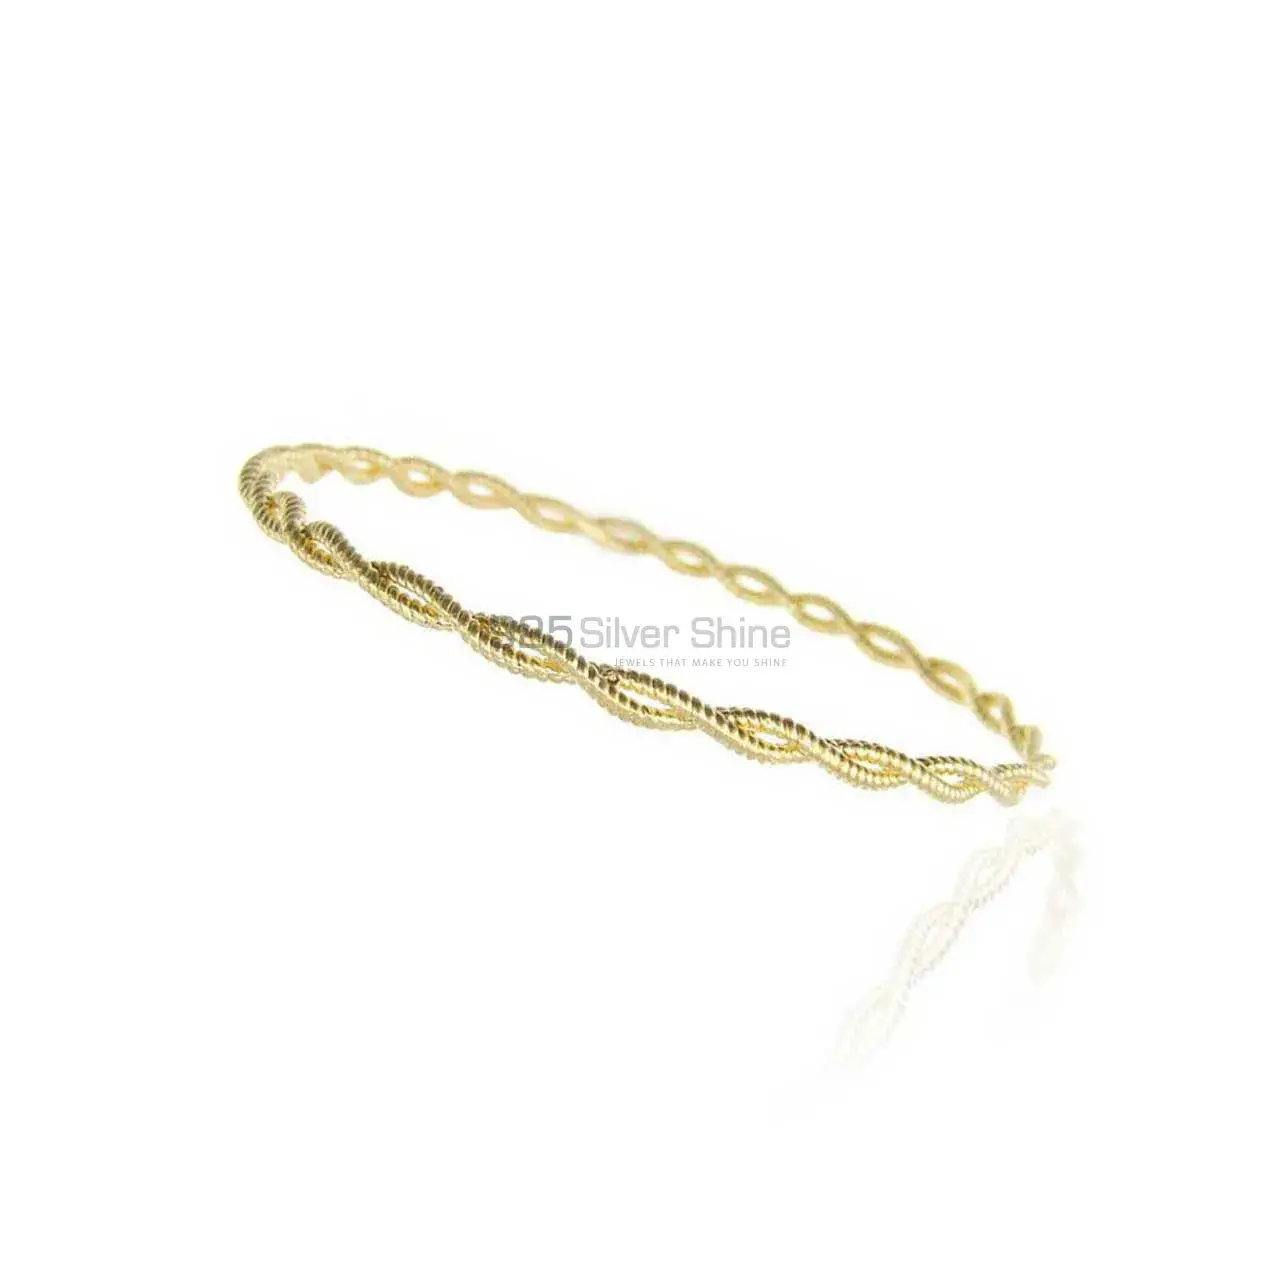 Wholesale 925 Sterling Silver Bracelets In Gold Plated 925SSB4_0